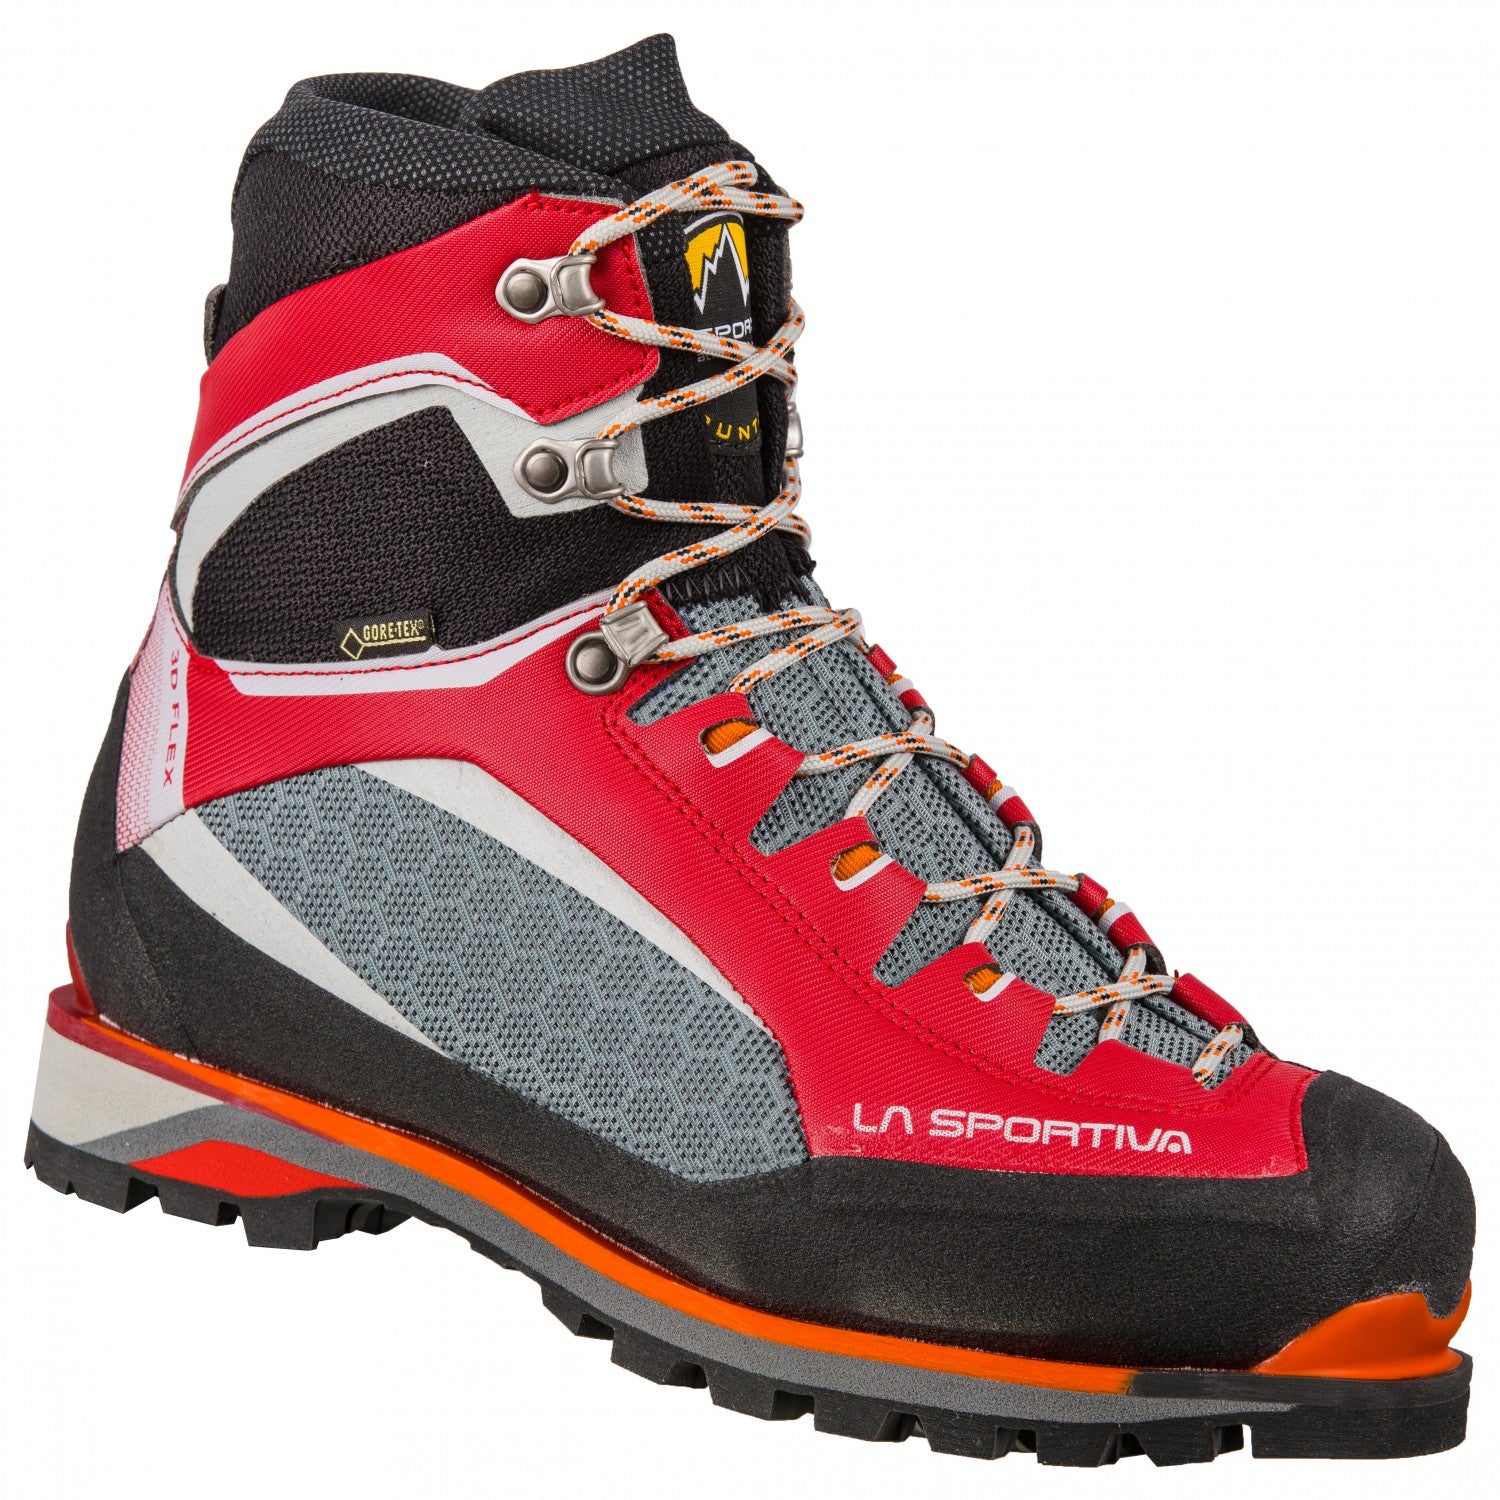 La Sportiva Trango Tower Extreme GTX Womens mountaineering boot, outer side view in Red/black/grey